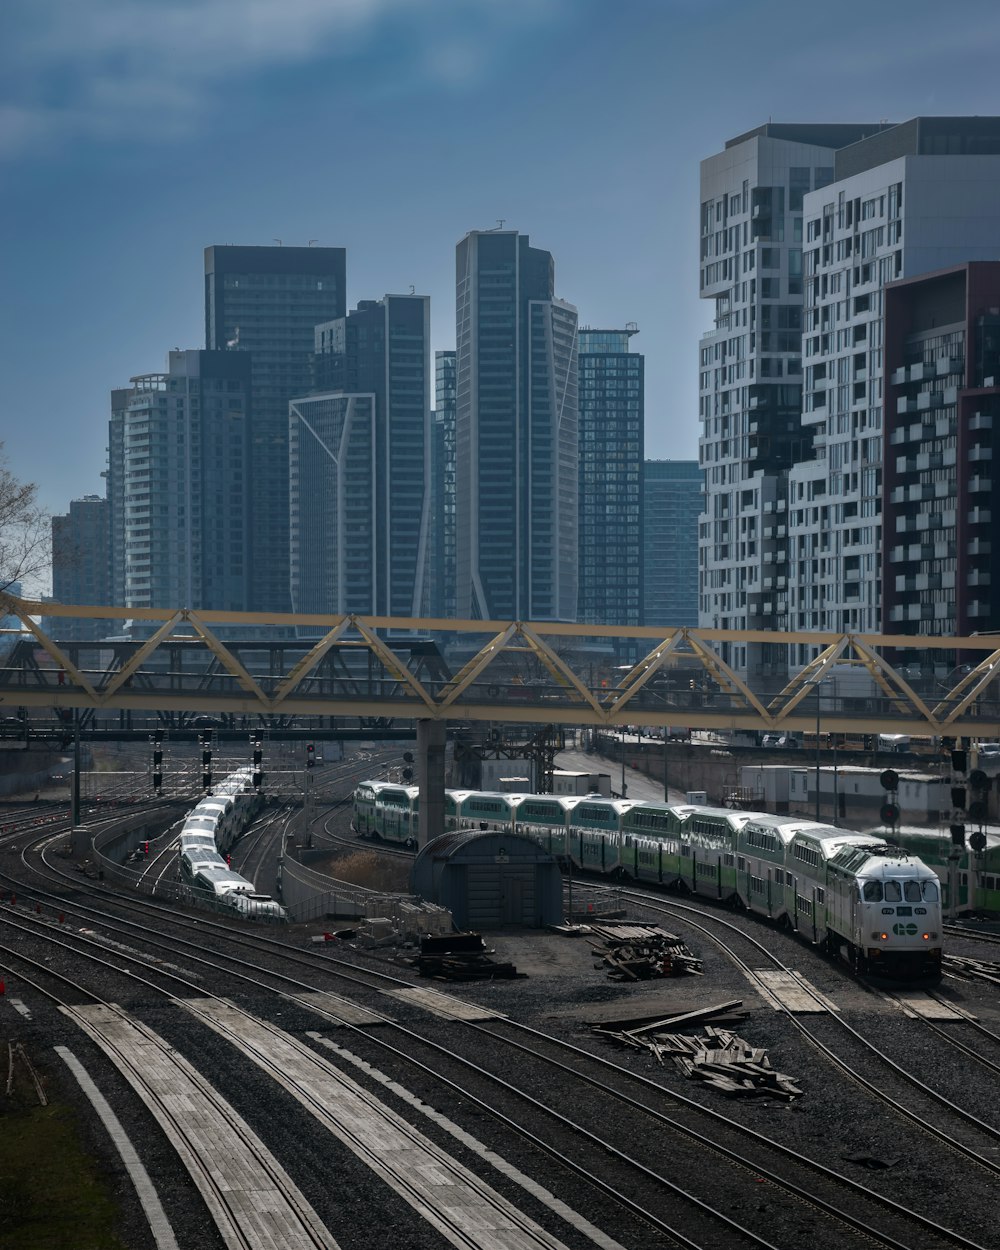 a train yard with several trains on the tracks